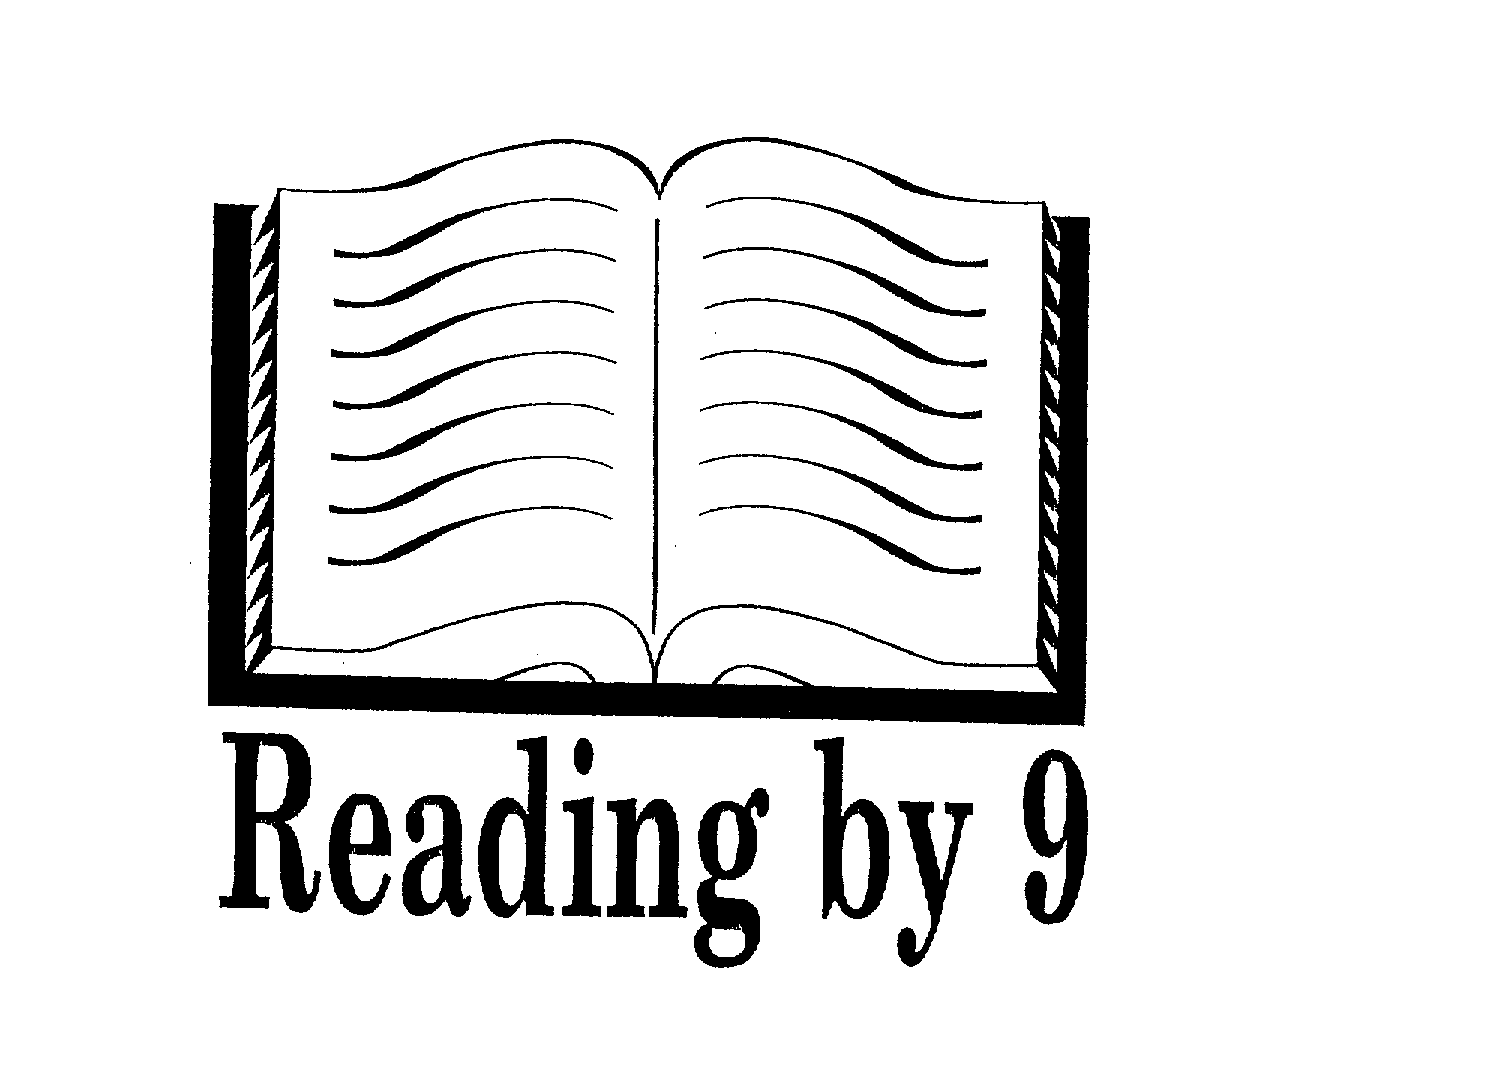  READING BY 9